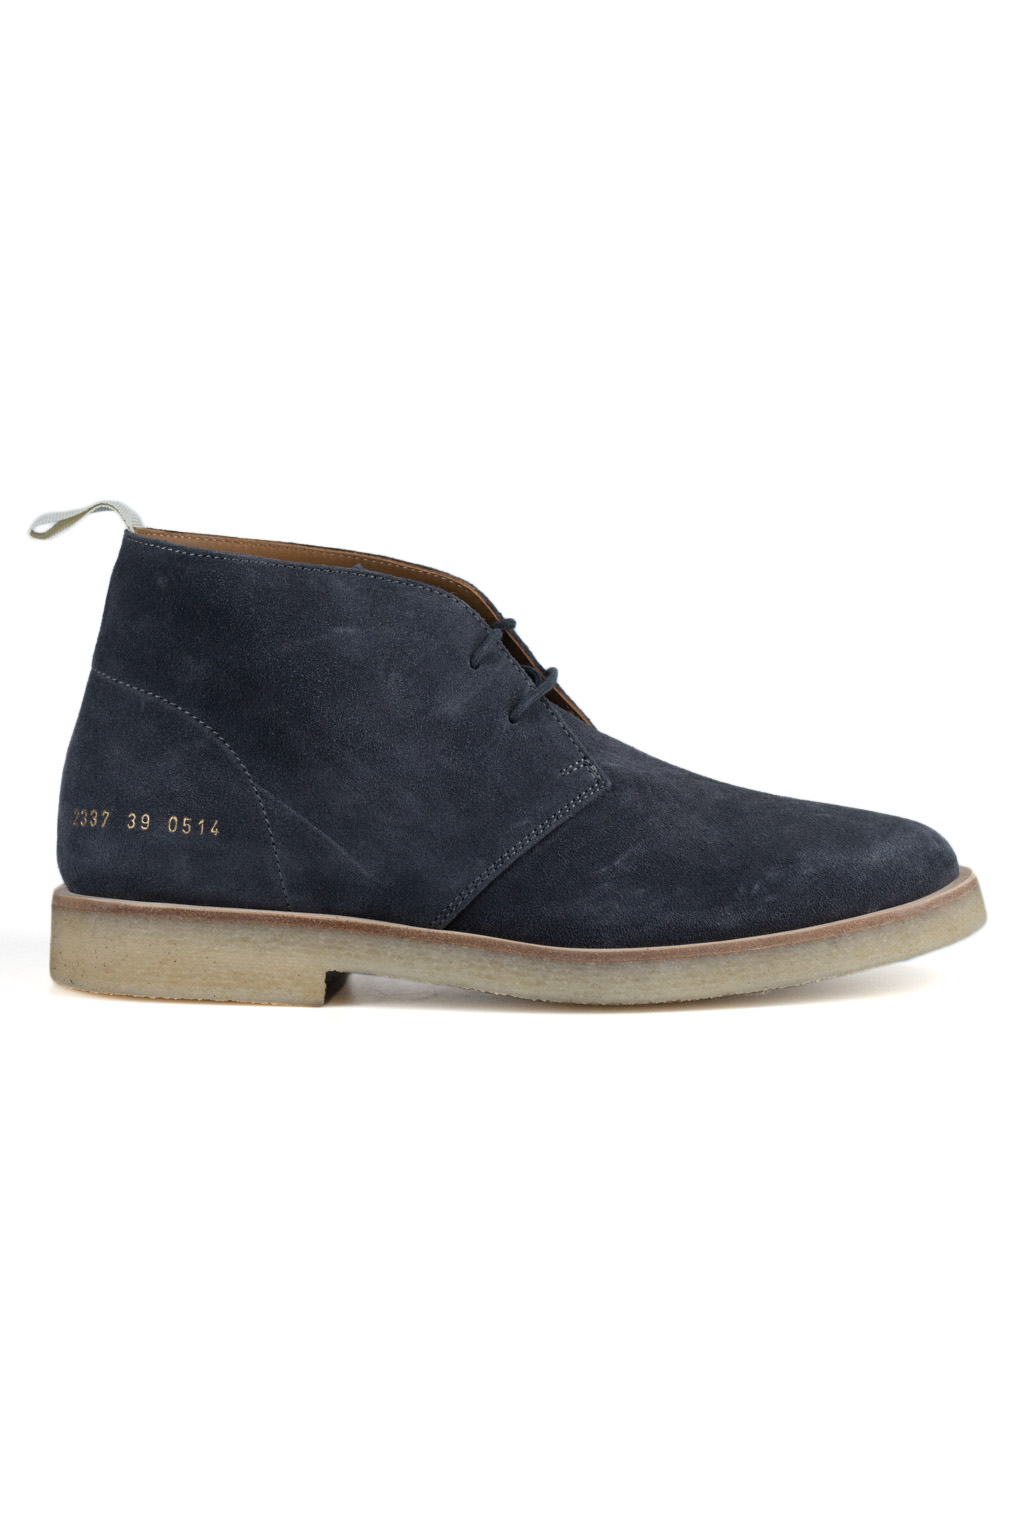 Common Projects Chukka - Washed Black